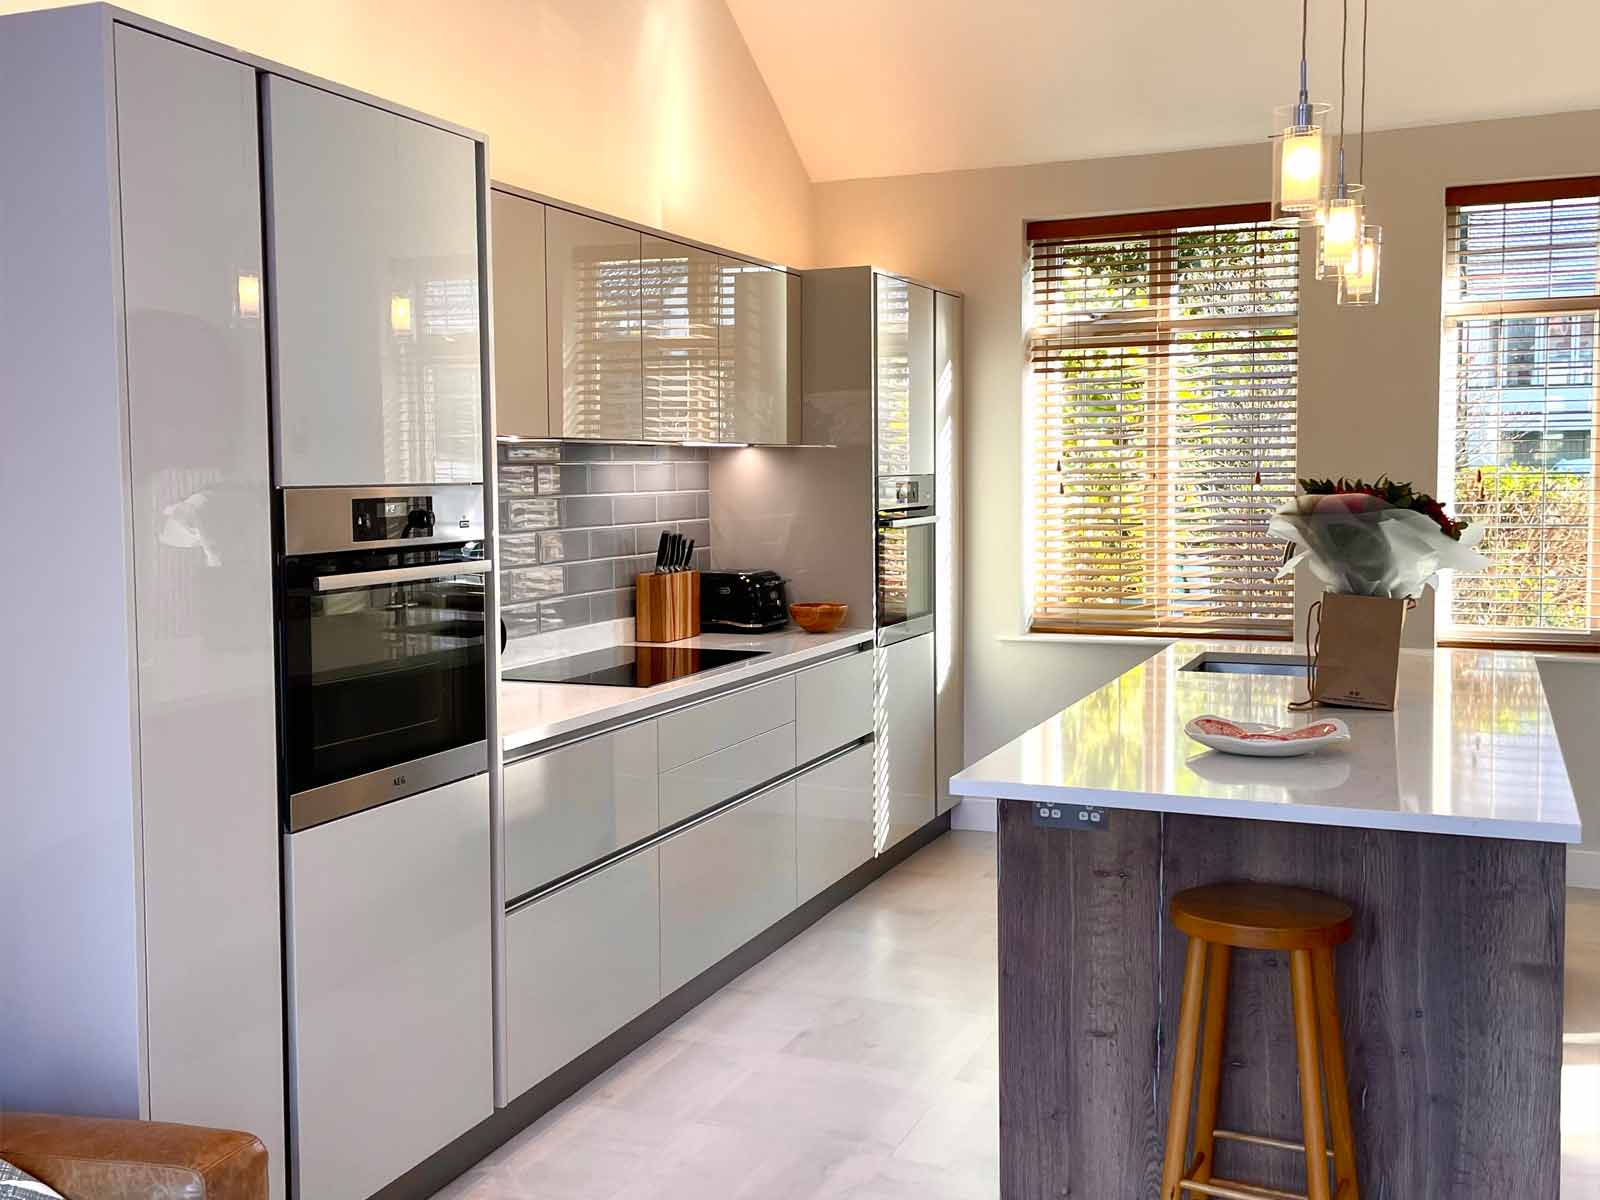 A handleless gloss cashmere kitchen with a tiled floor